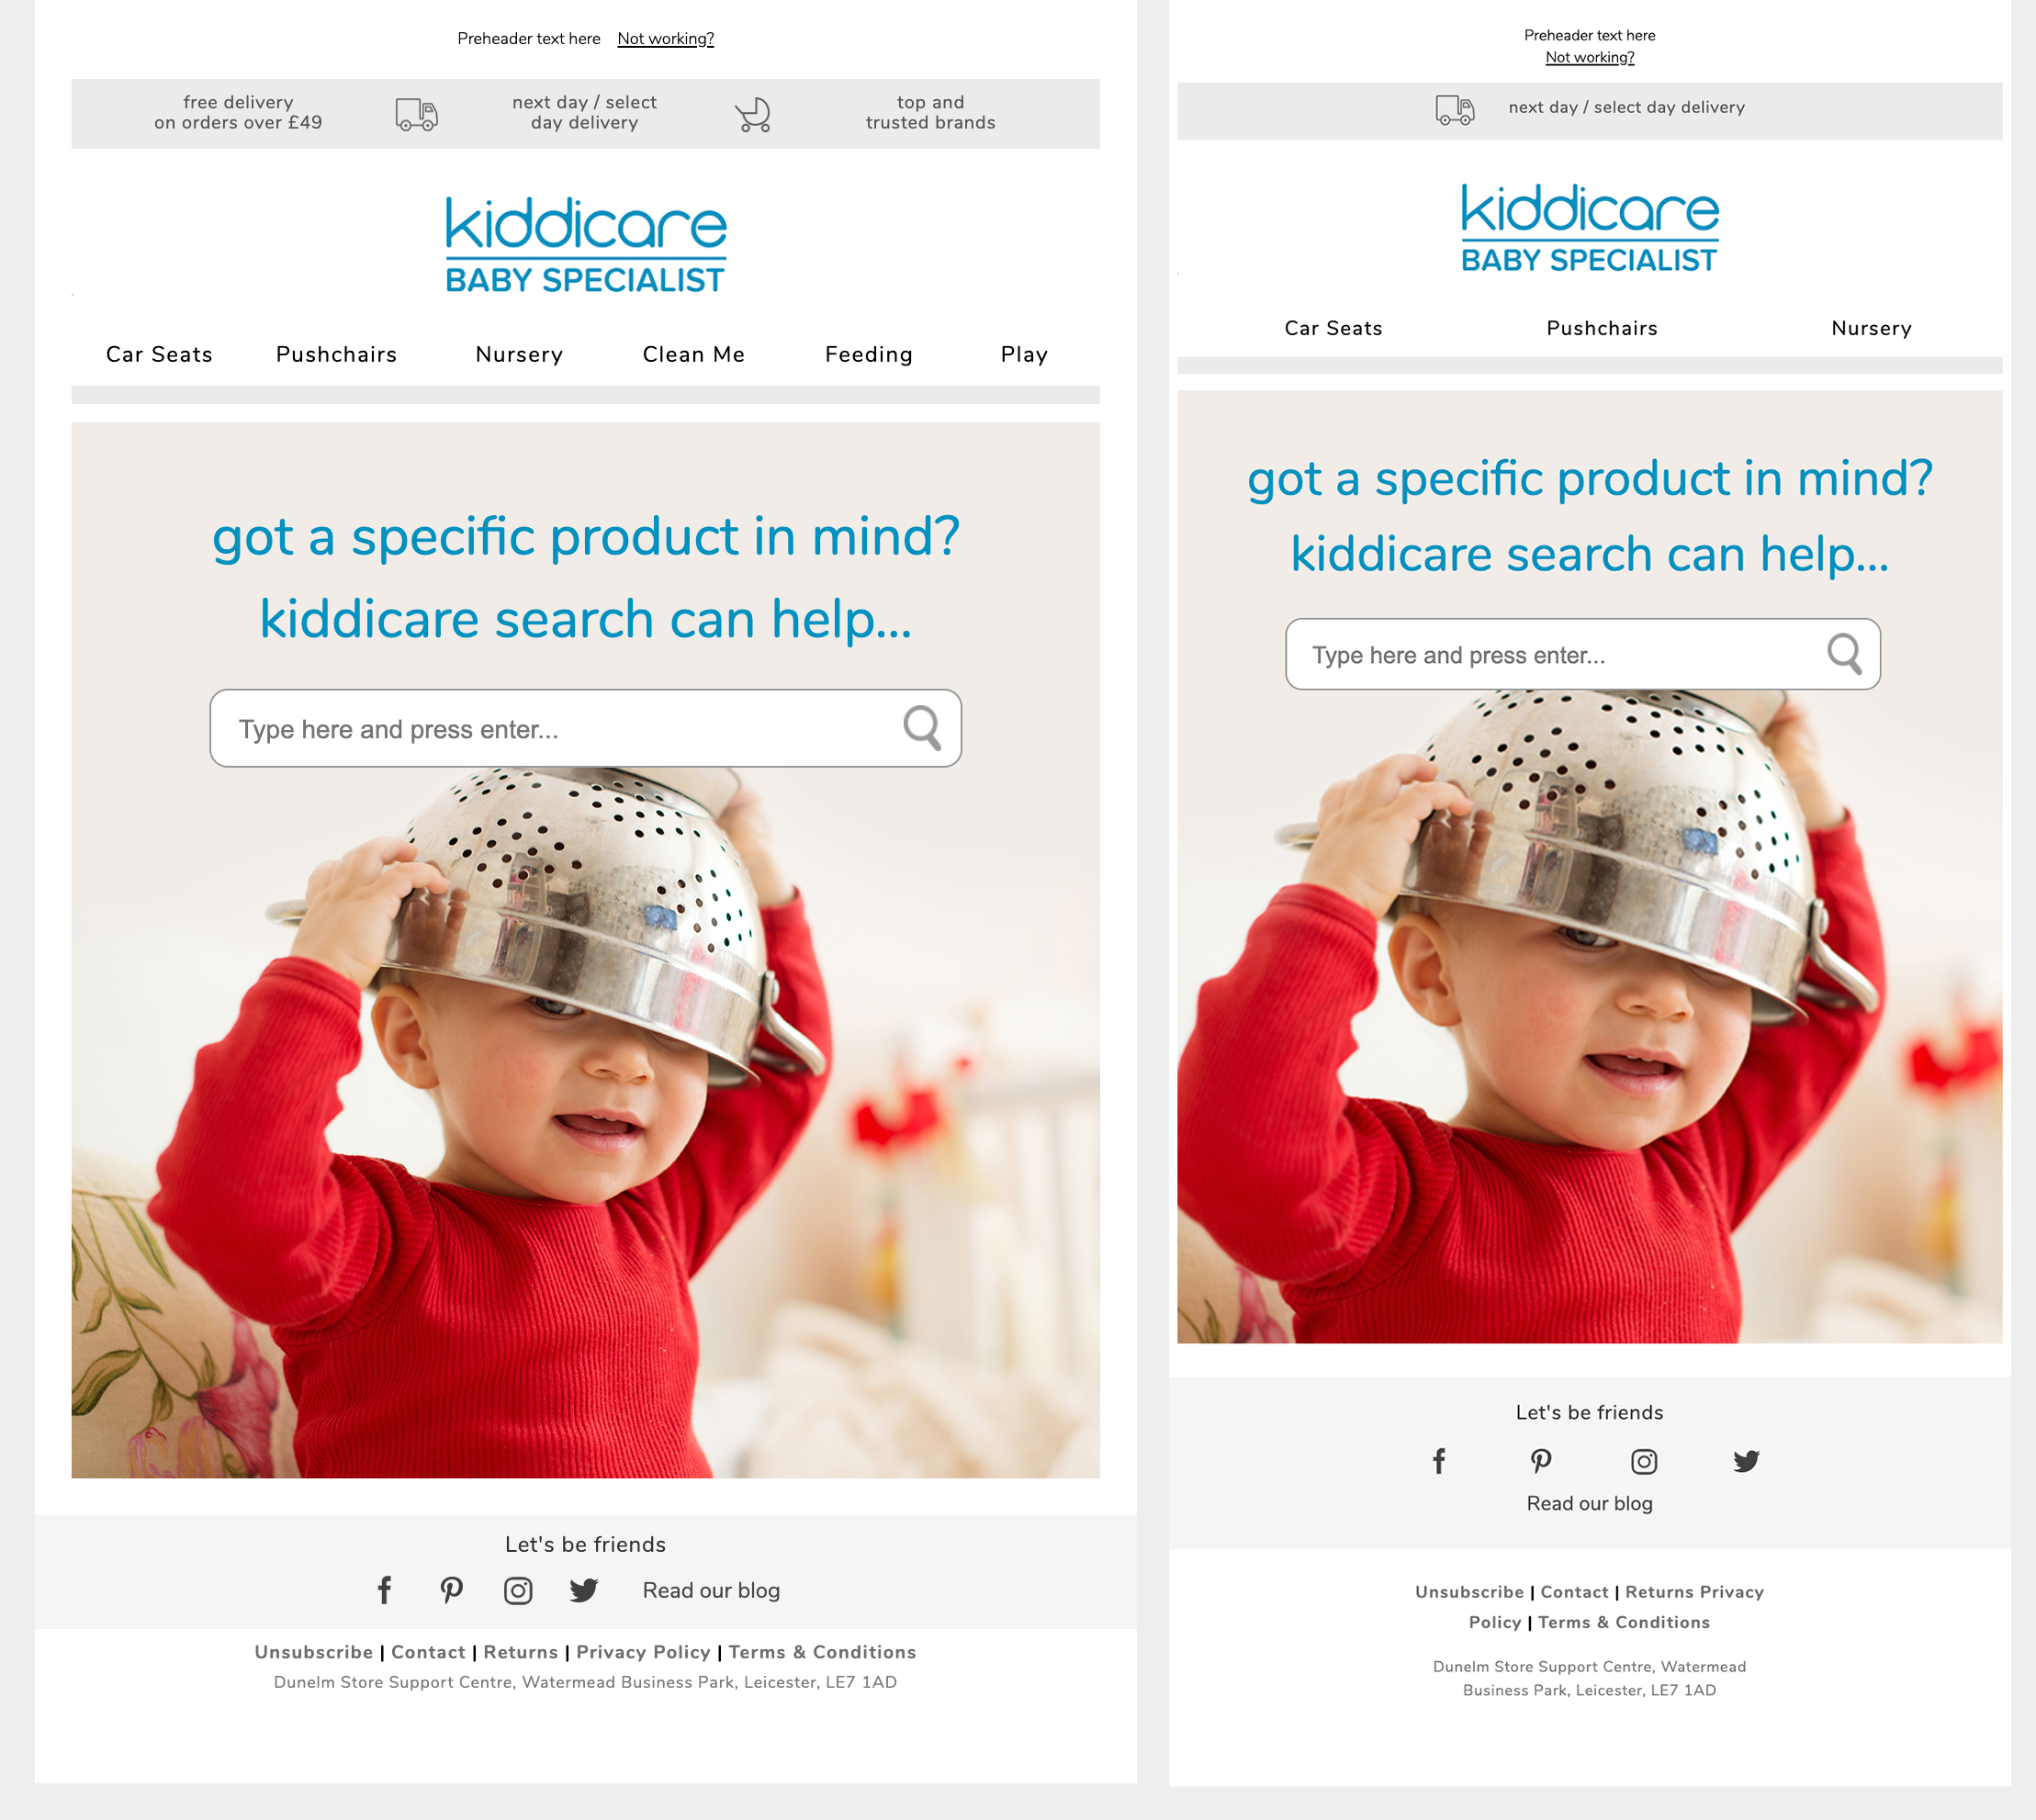 Kiddicare Email Search